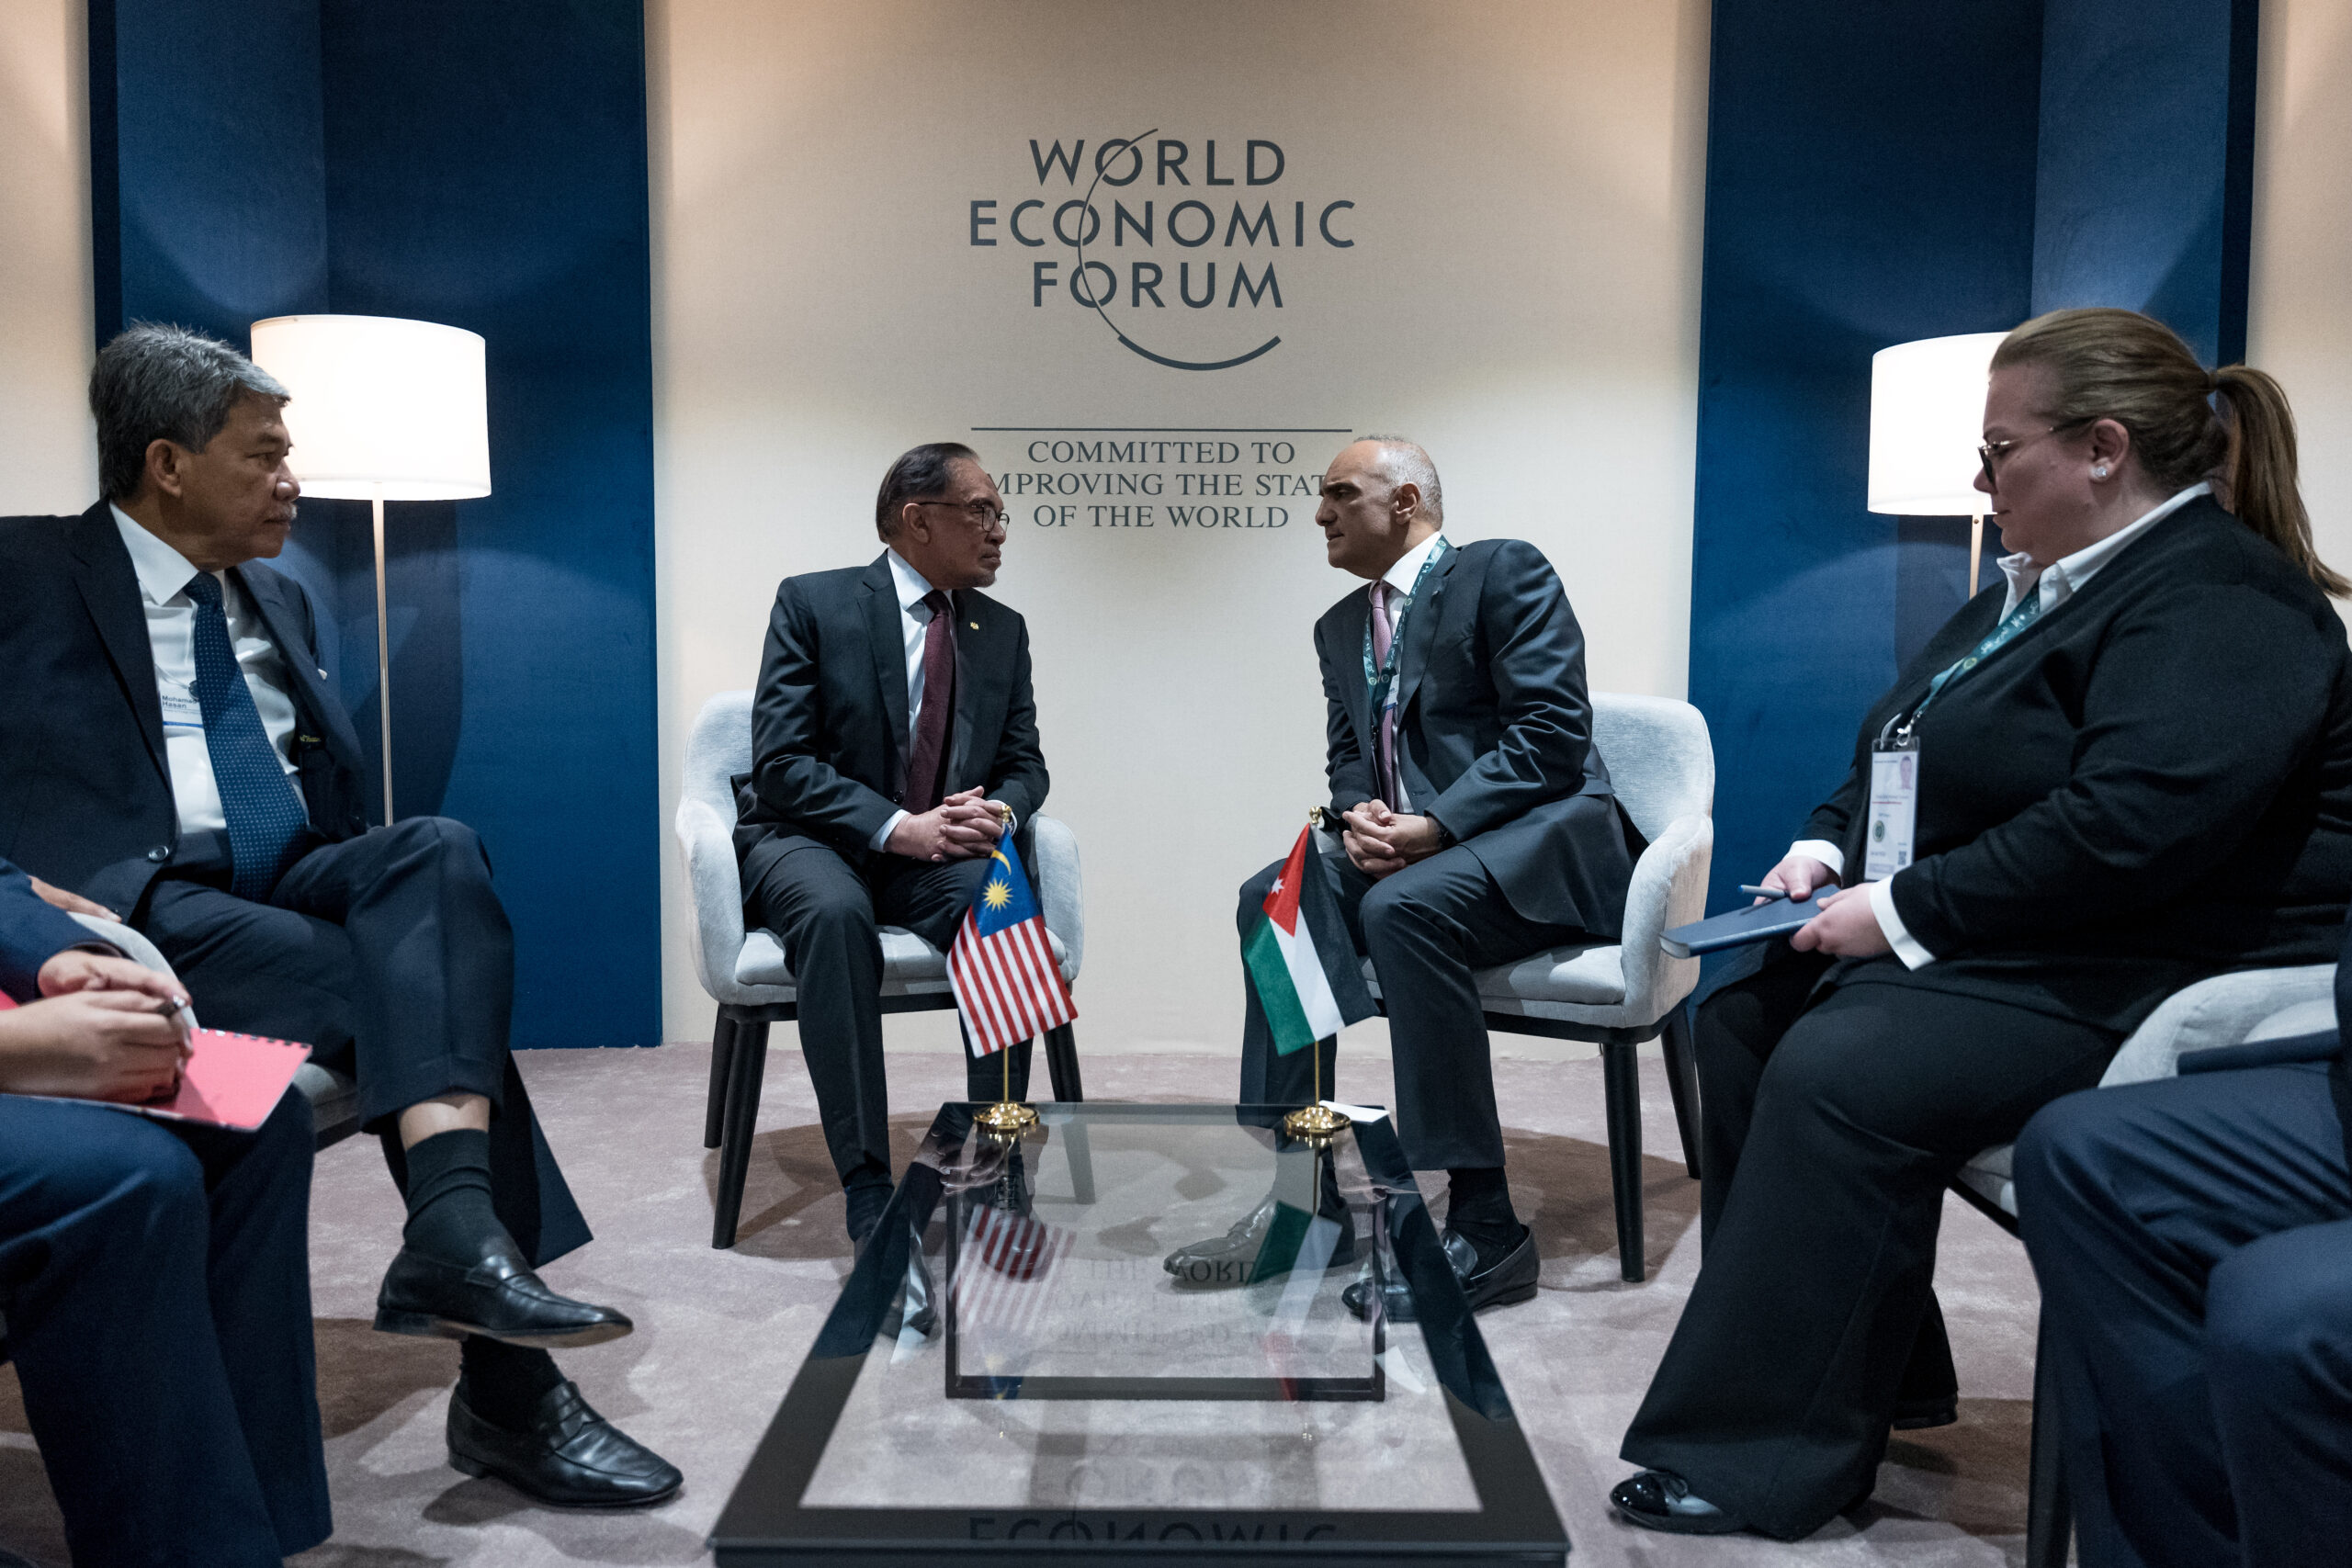 Anwar highlights crucial need to support Palestinian recognition in meeting with Jordan PM